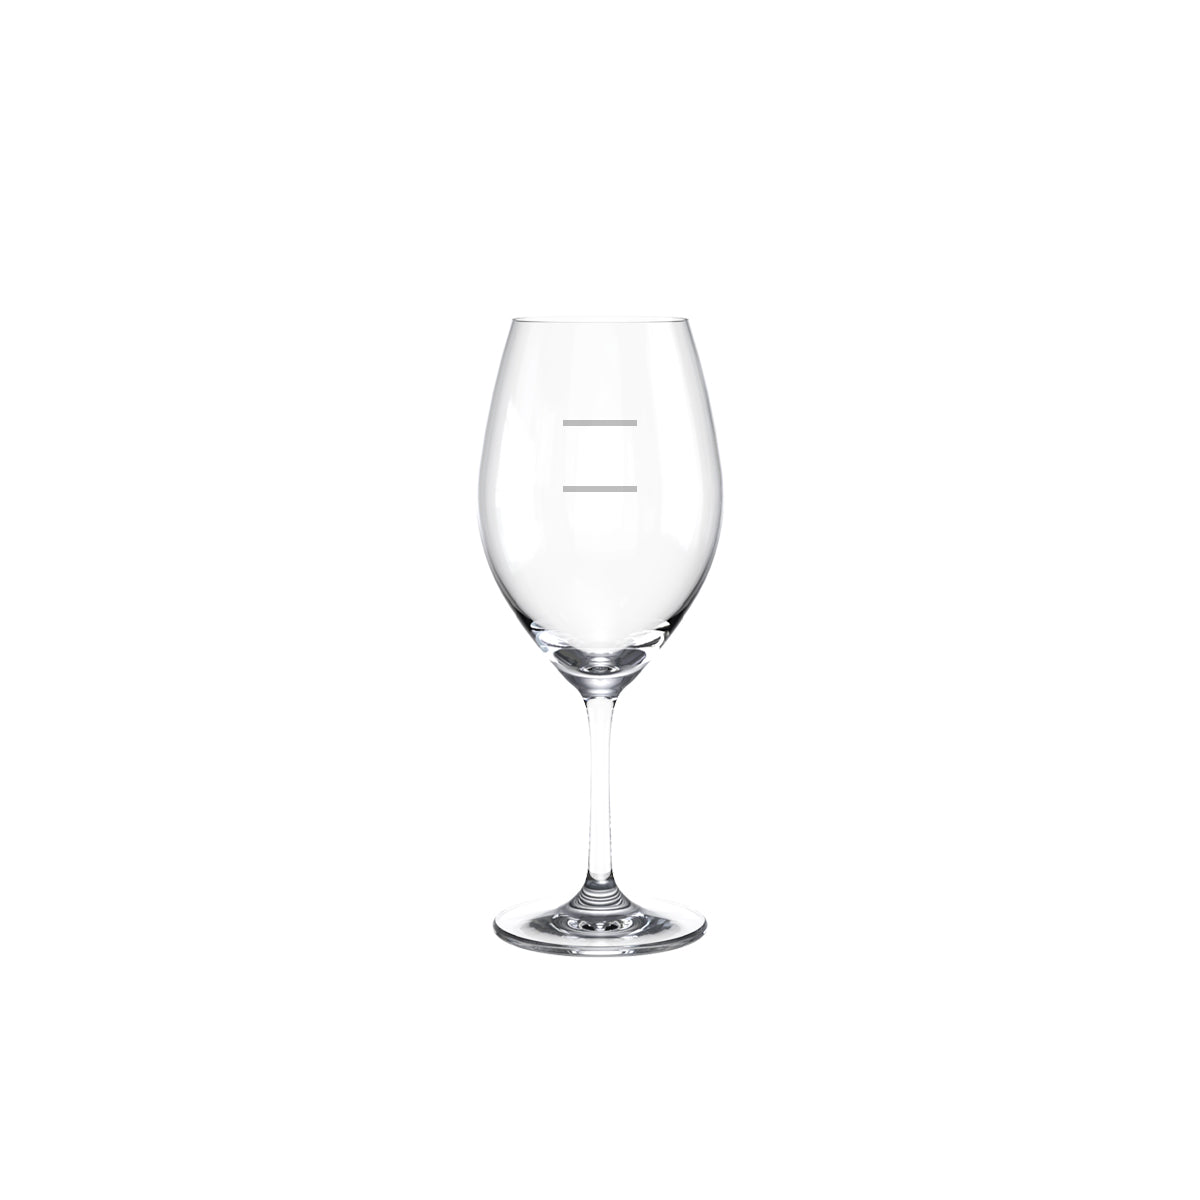 Melody Chianti - 375Ml, Double Pour Line from Ryner Glass. Pour line printed and sold in boxes of 24. Hospitality quality at wholesale price with The Flying Fork! 